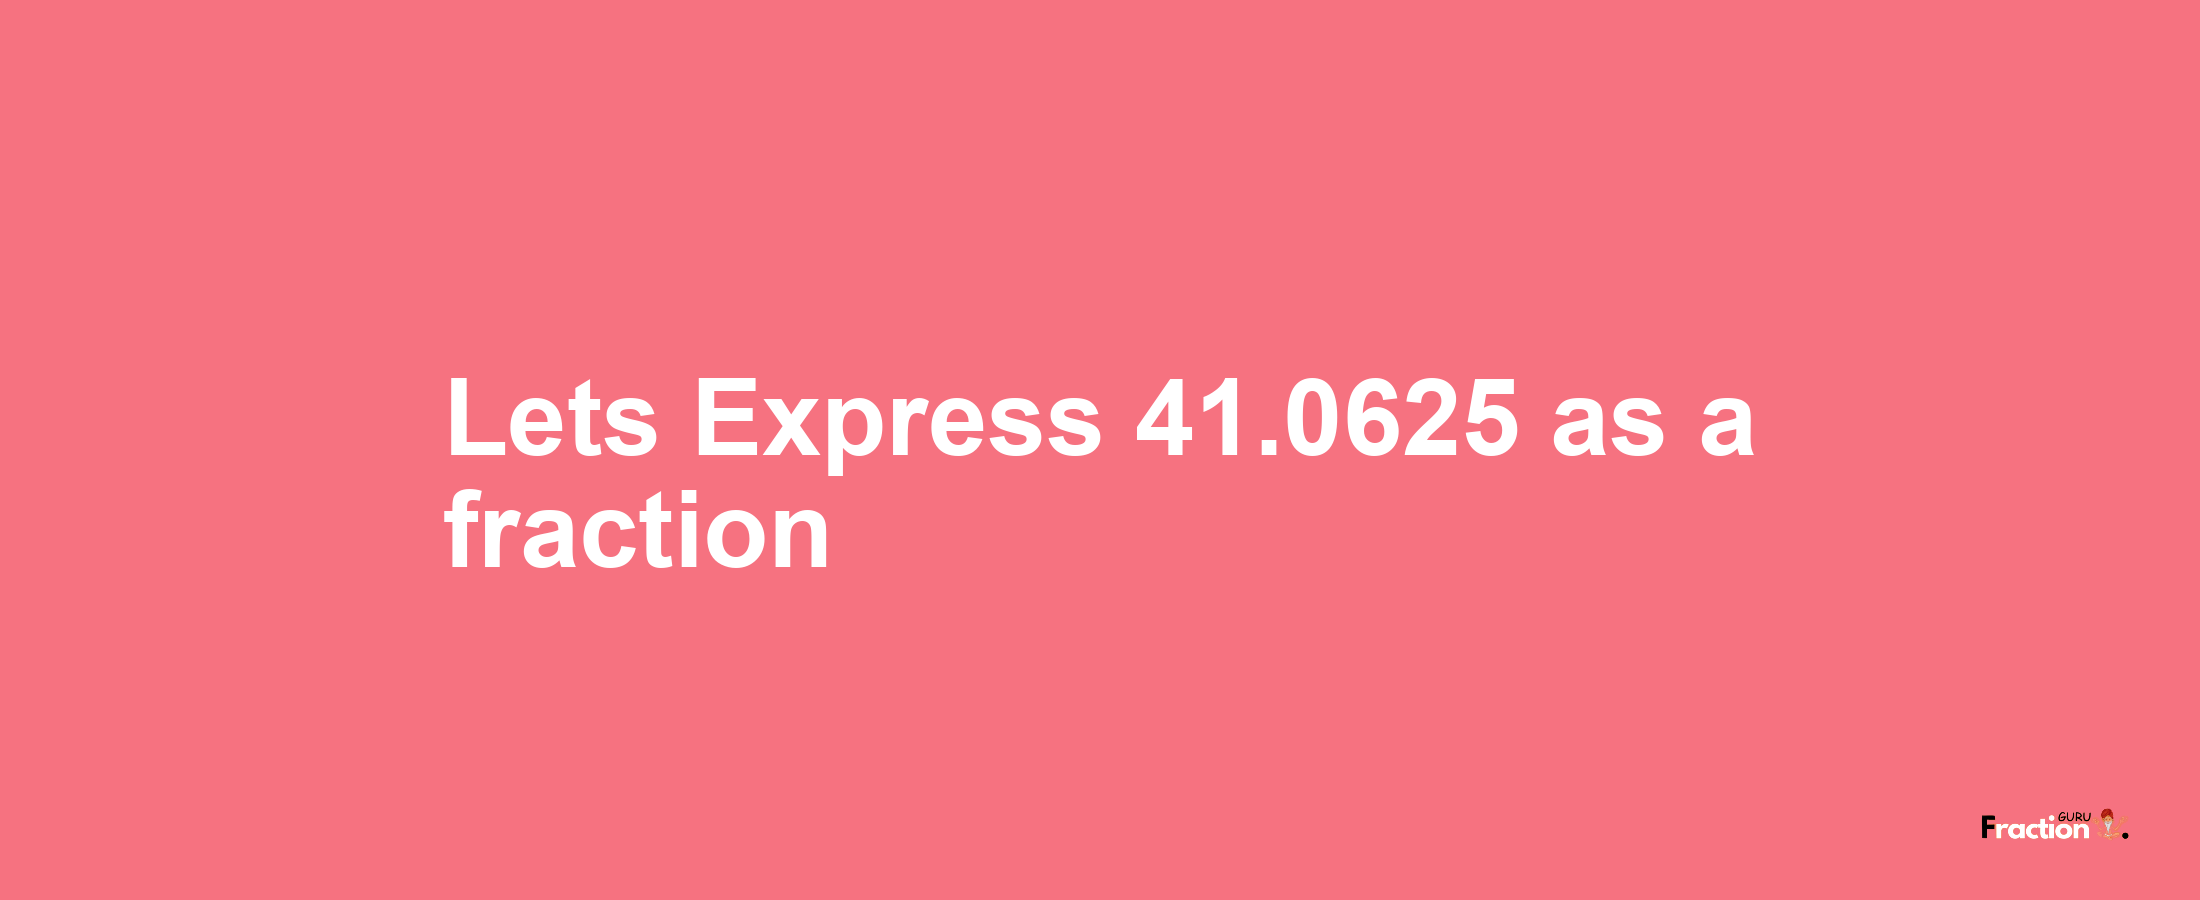 Lets Express 41.0625 as afraction